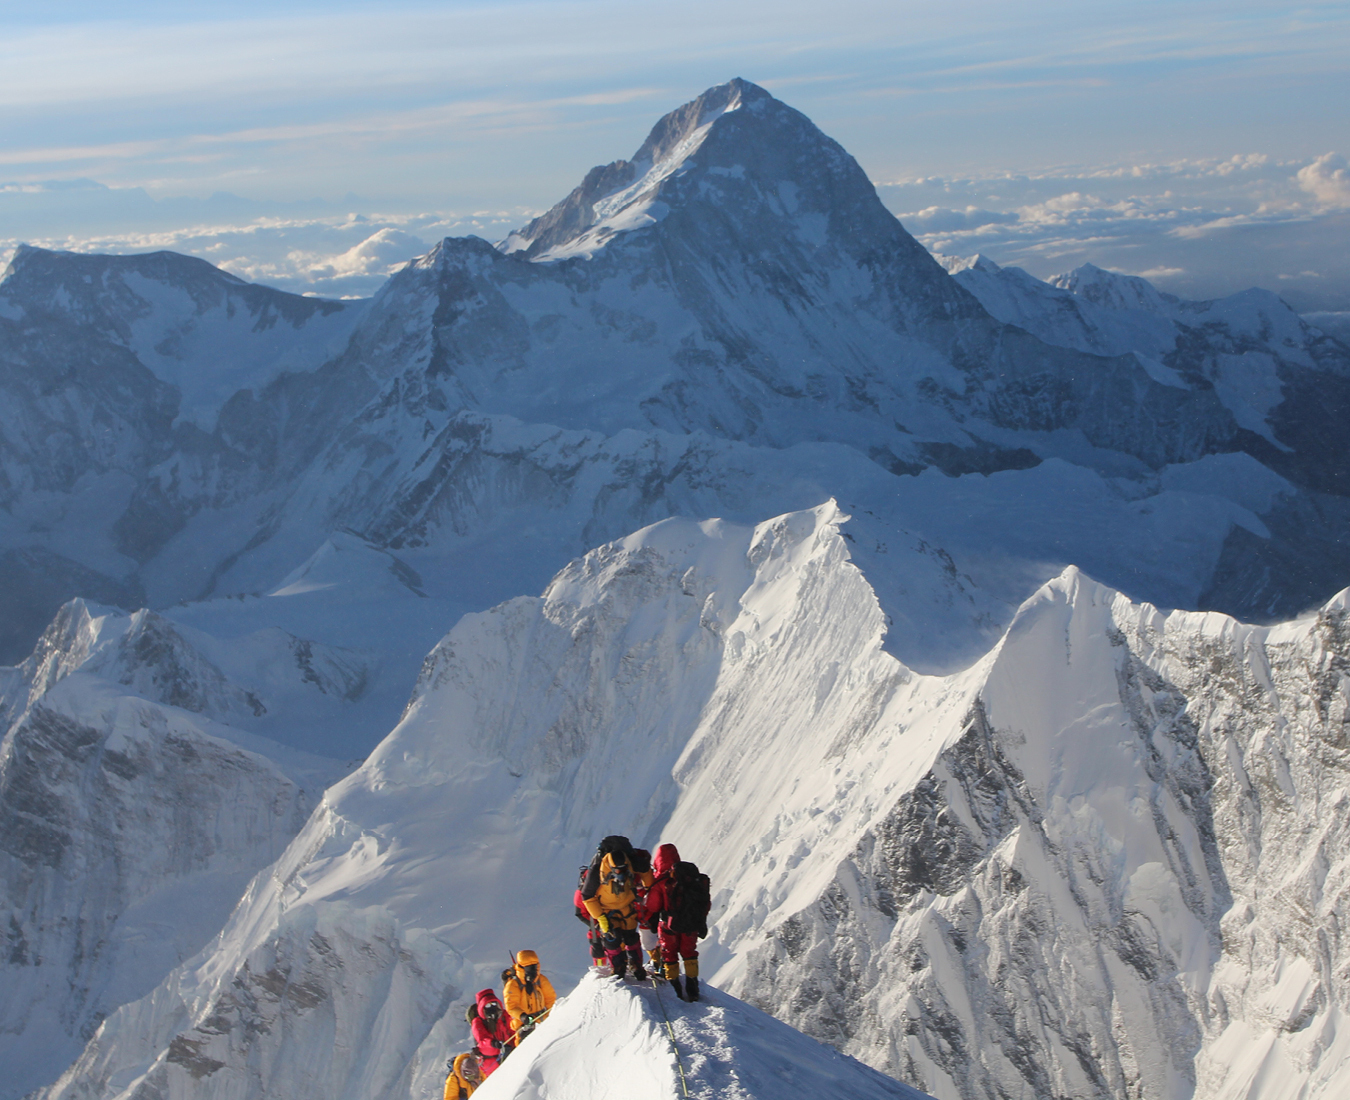 Climbers on South Summit Everest